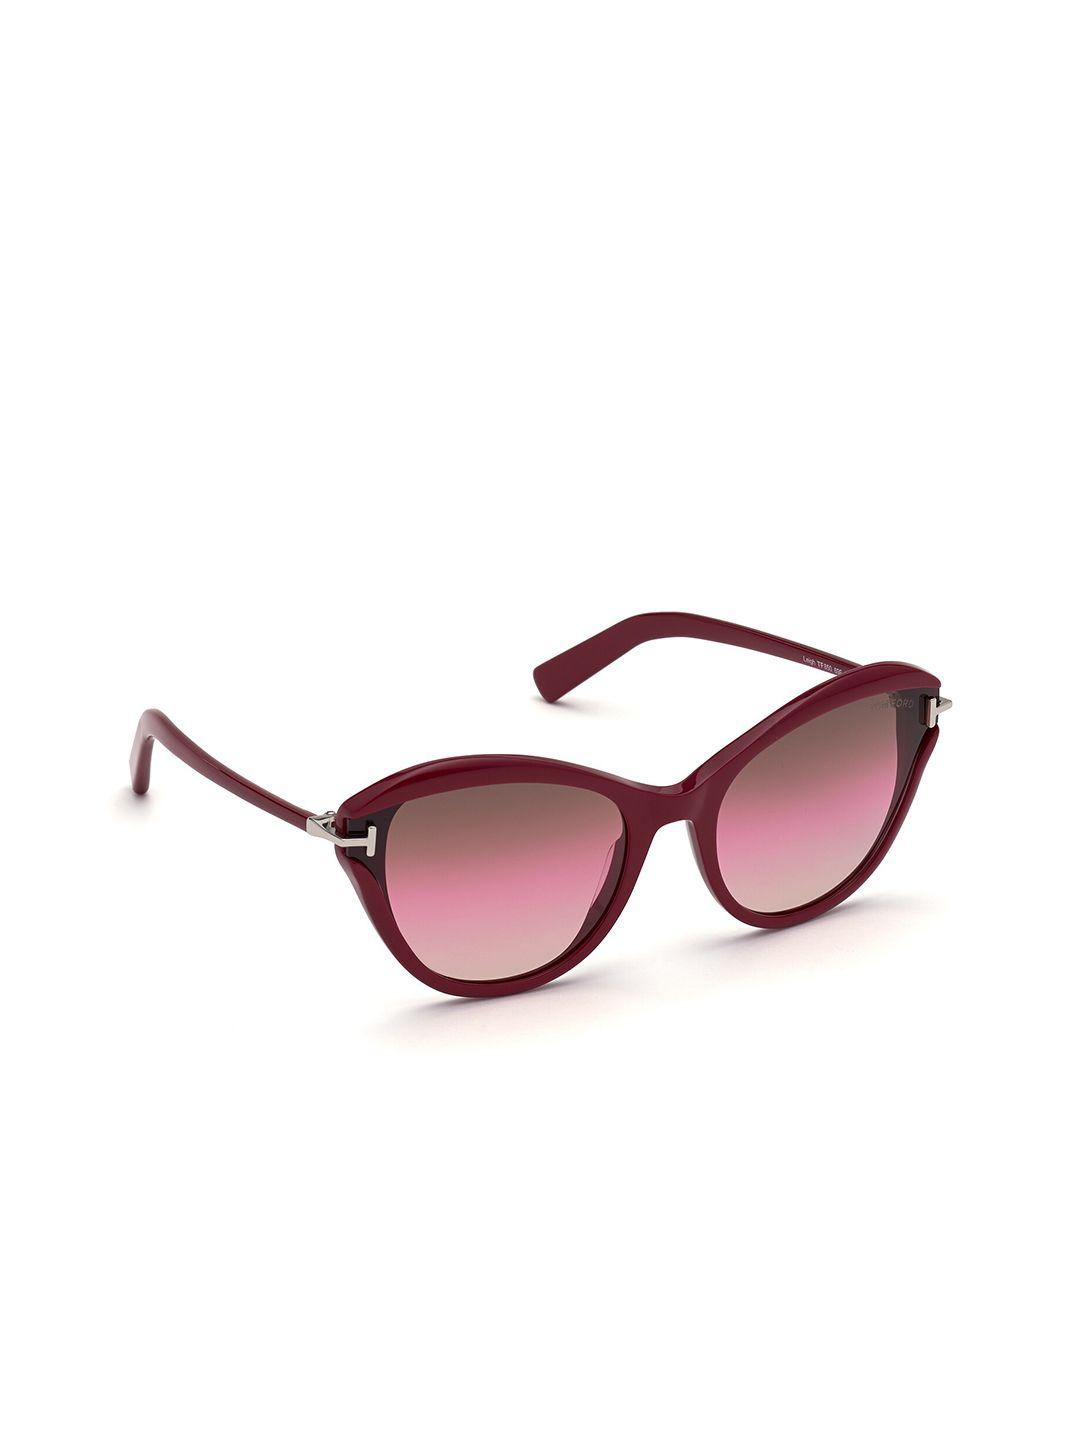 tom ford women cateye sunglasses with uv protected lens